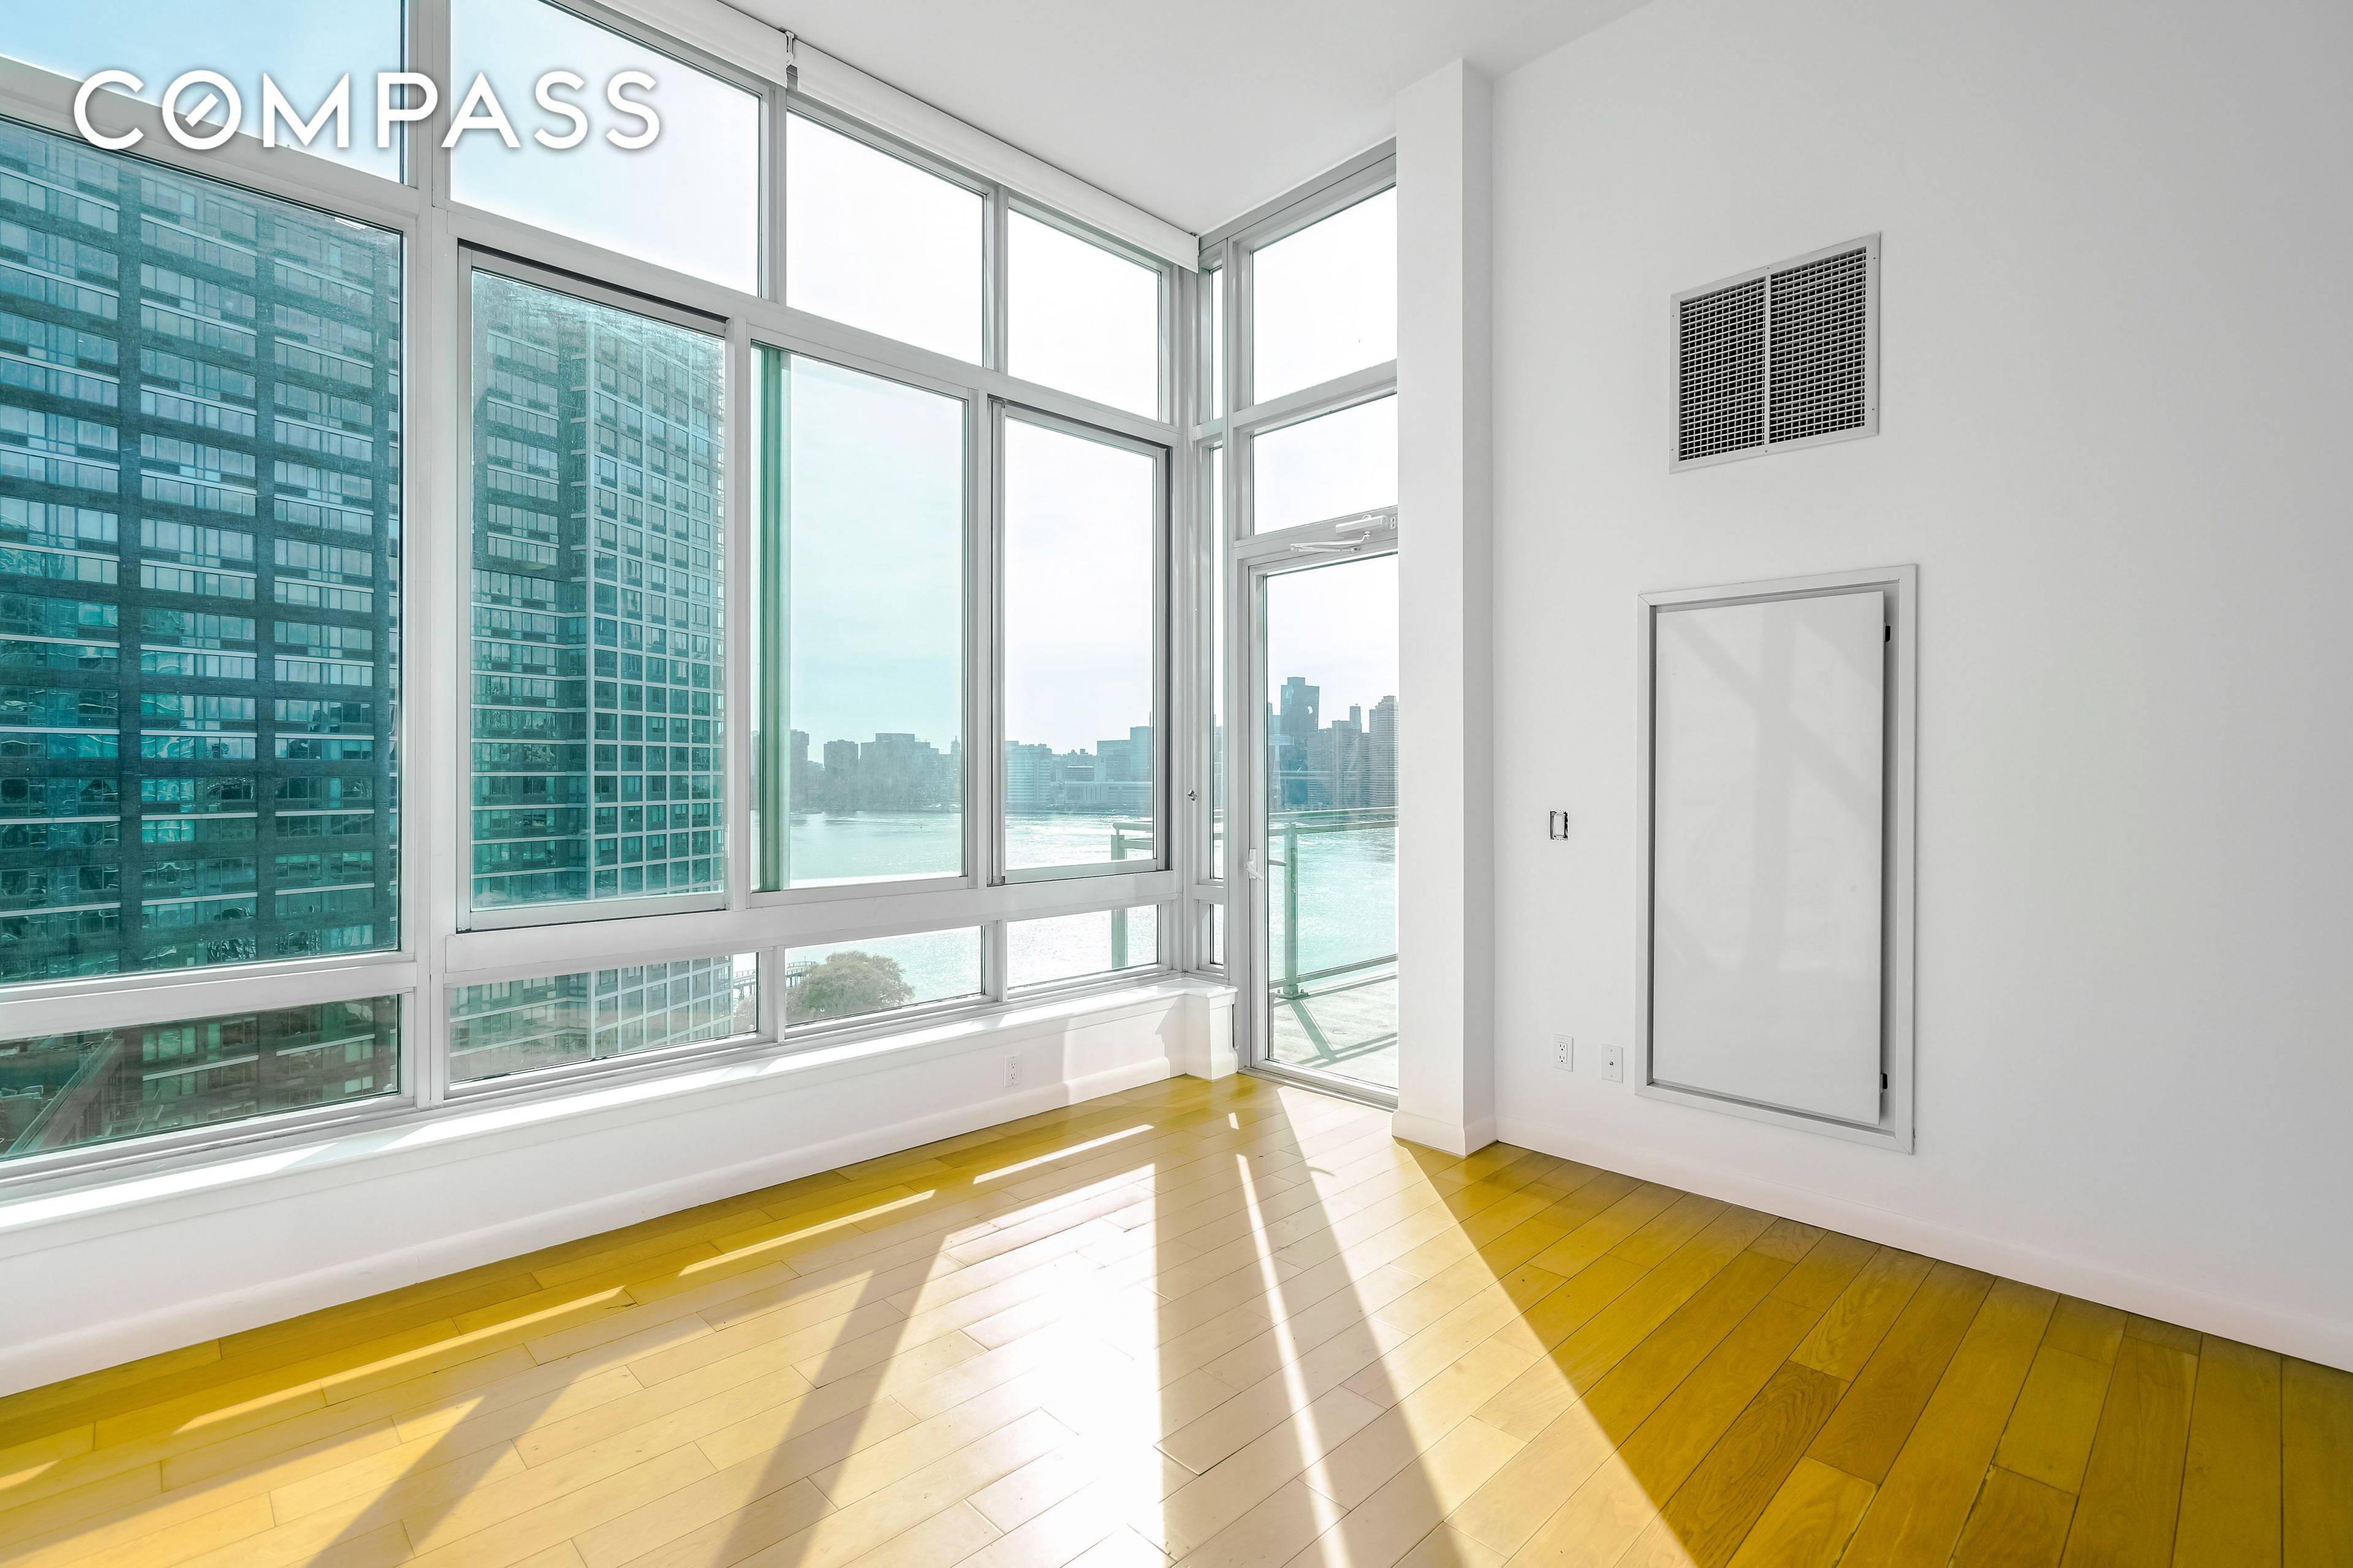 We are pleased to present The View at East Coast 1606, a one bedroom and one bathroom with Balcony at Long Island City s most exclusive waterfront area.